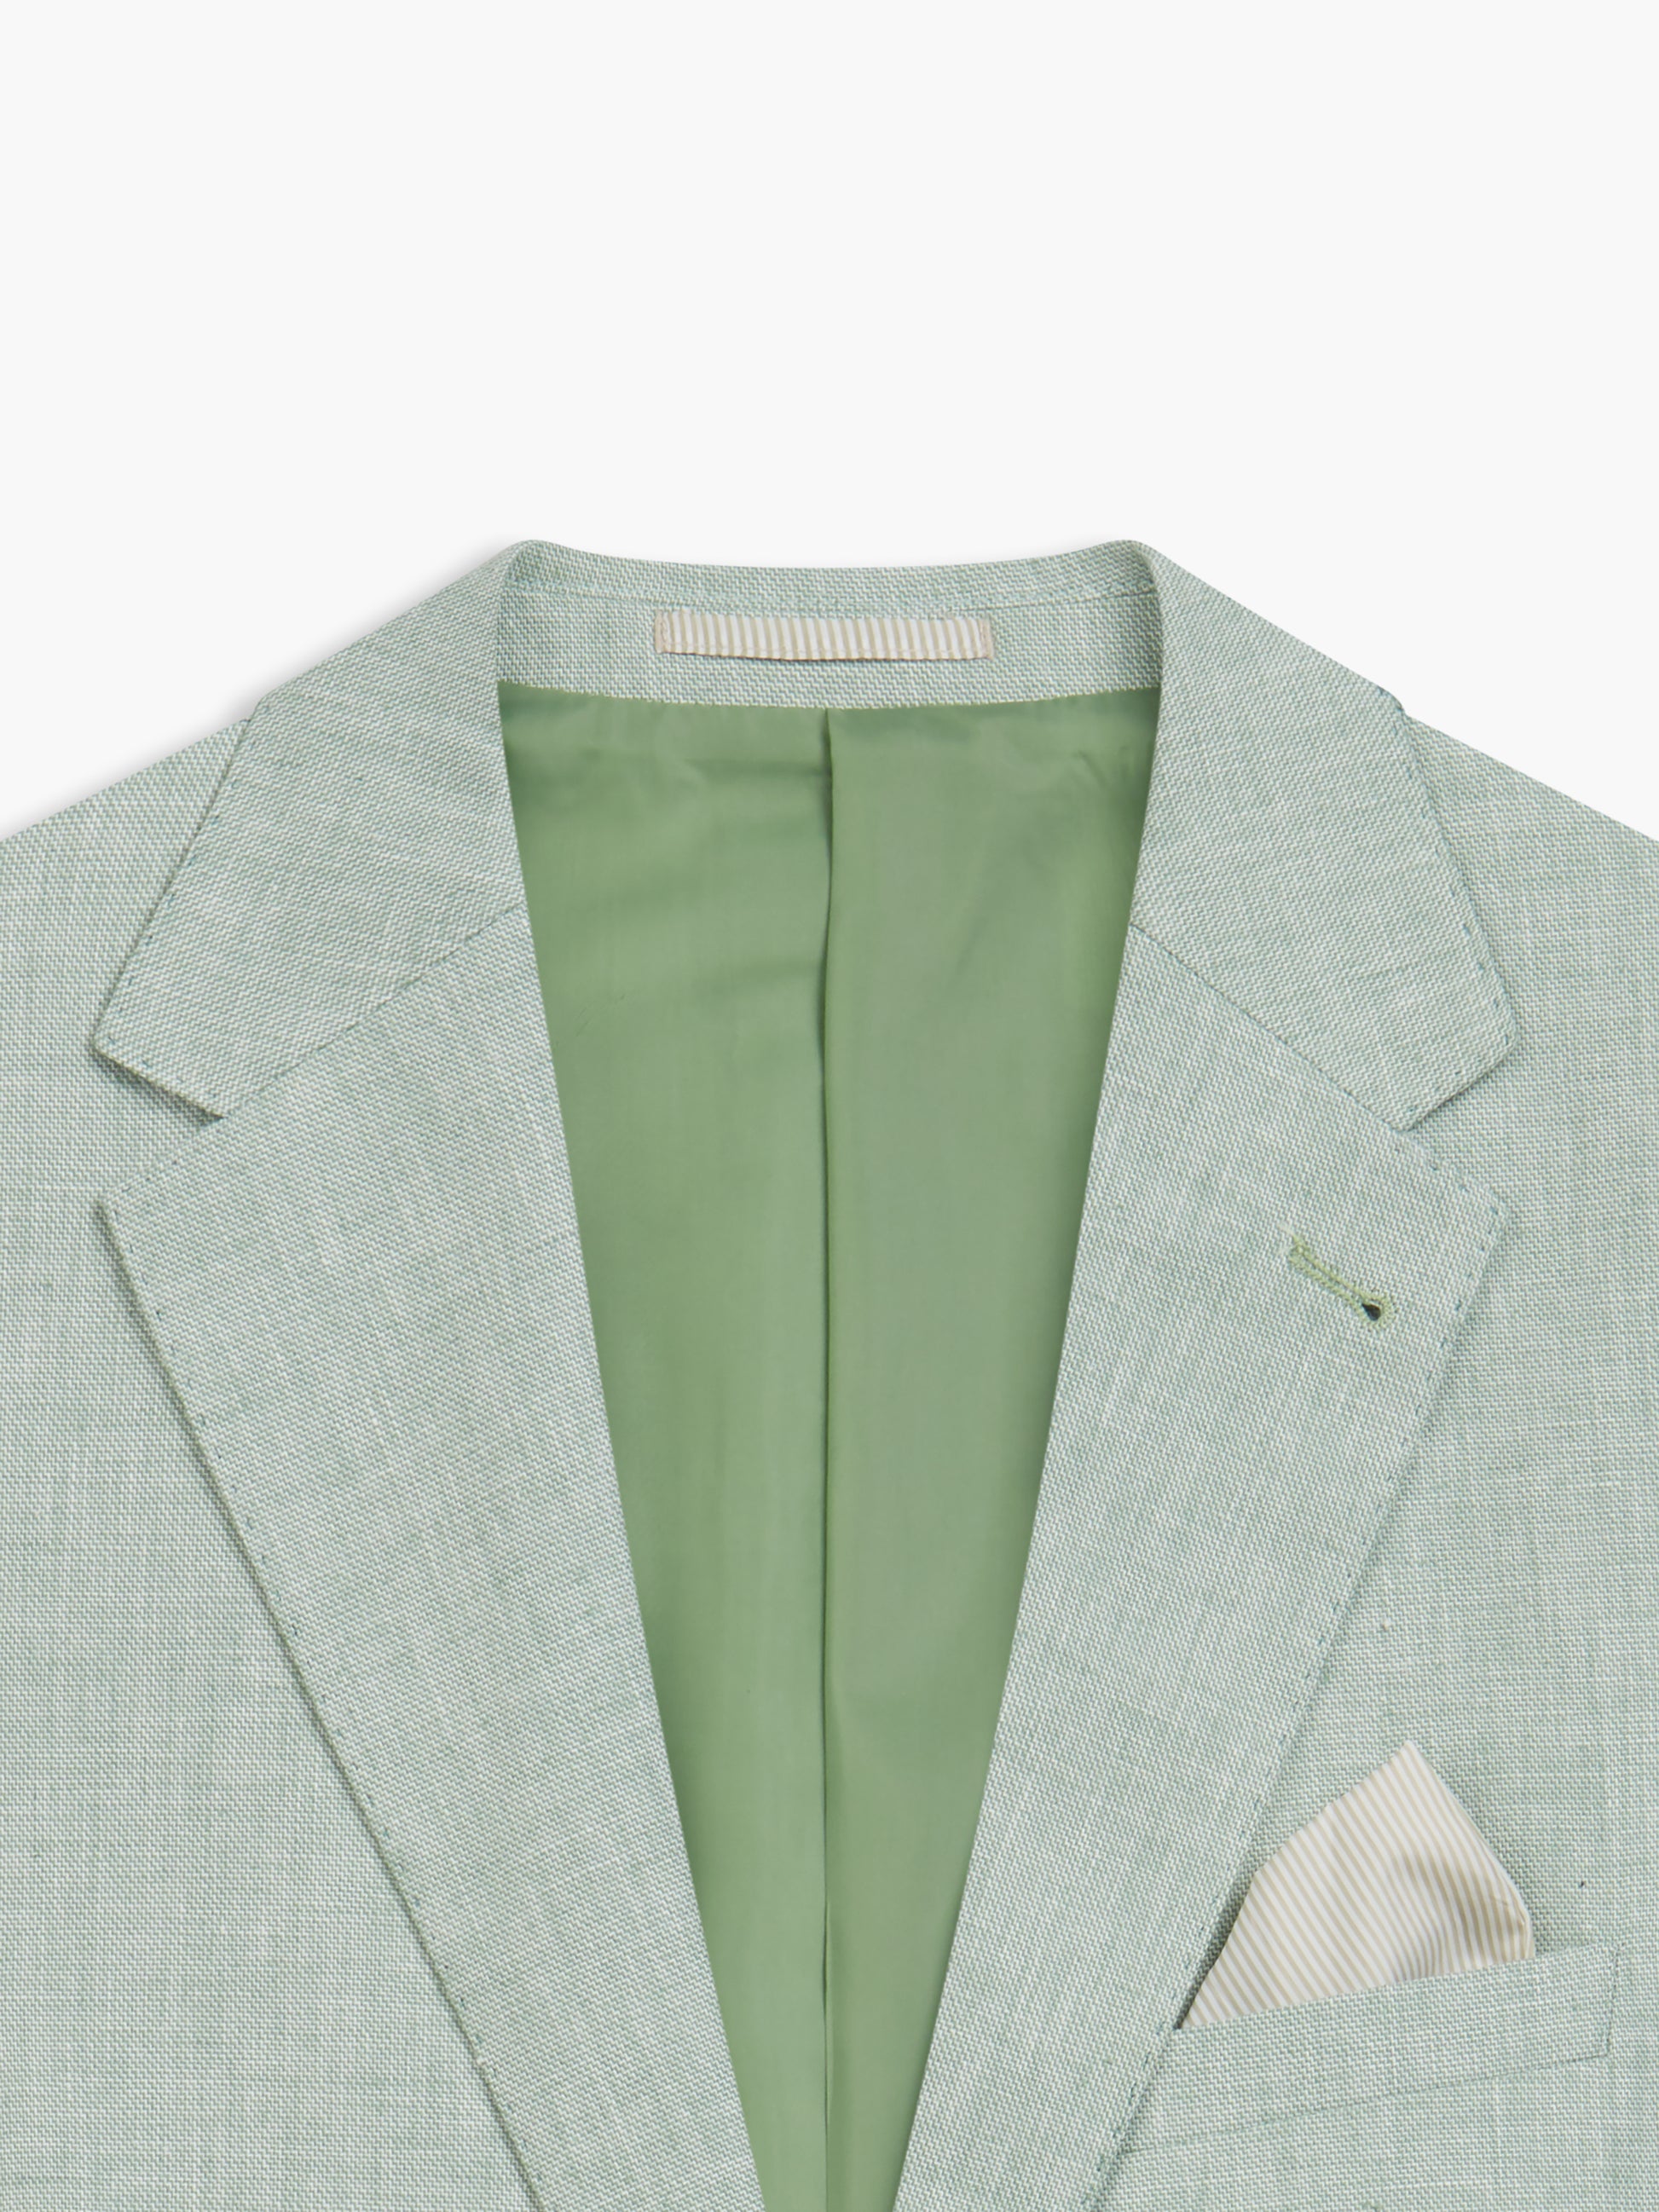 Image 7 of Slim Fit Single Breasted Linen Suit Jacket in Light Green